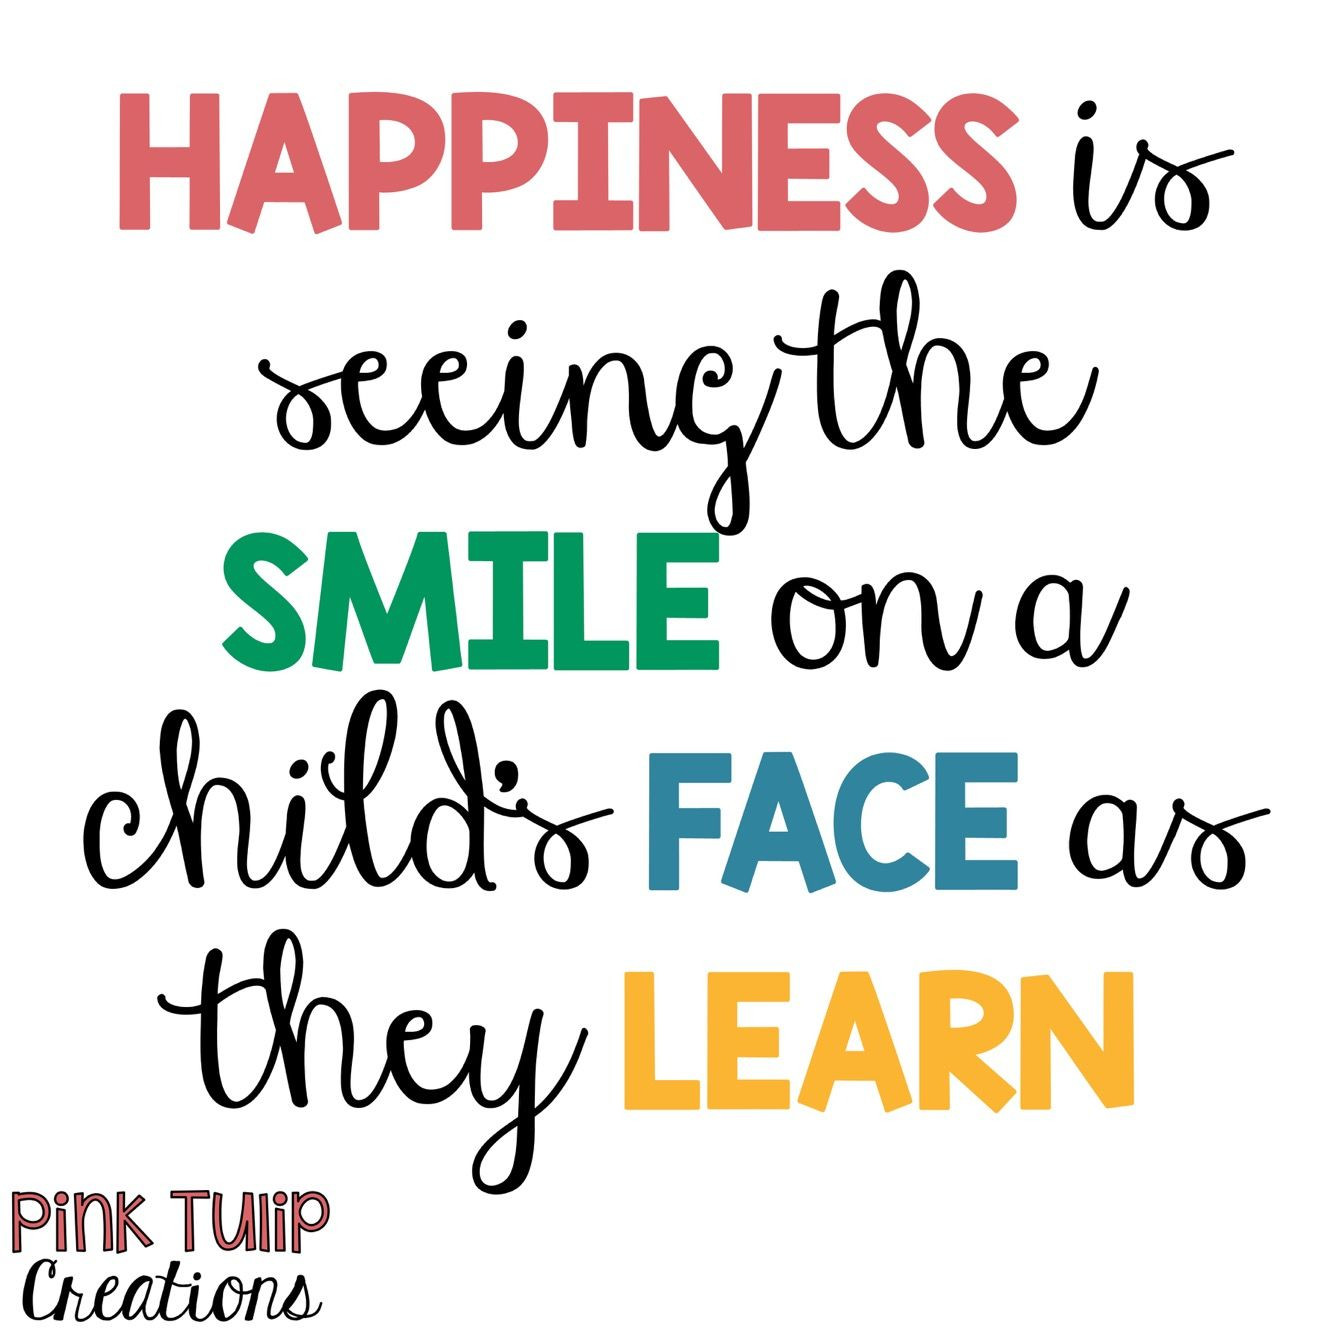 Teaching Children Quotes
 Happiness is seeing the smile on a child s face as they